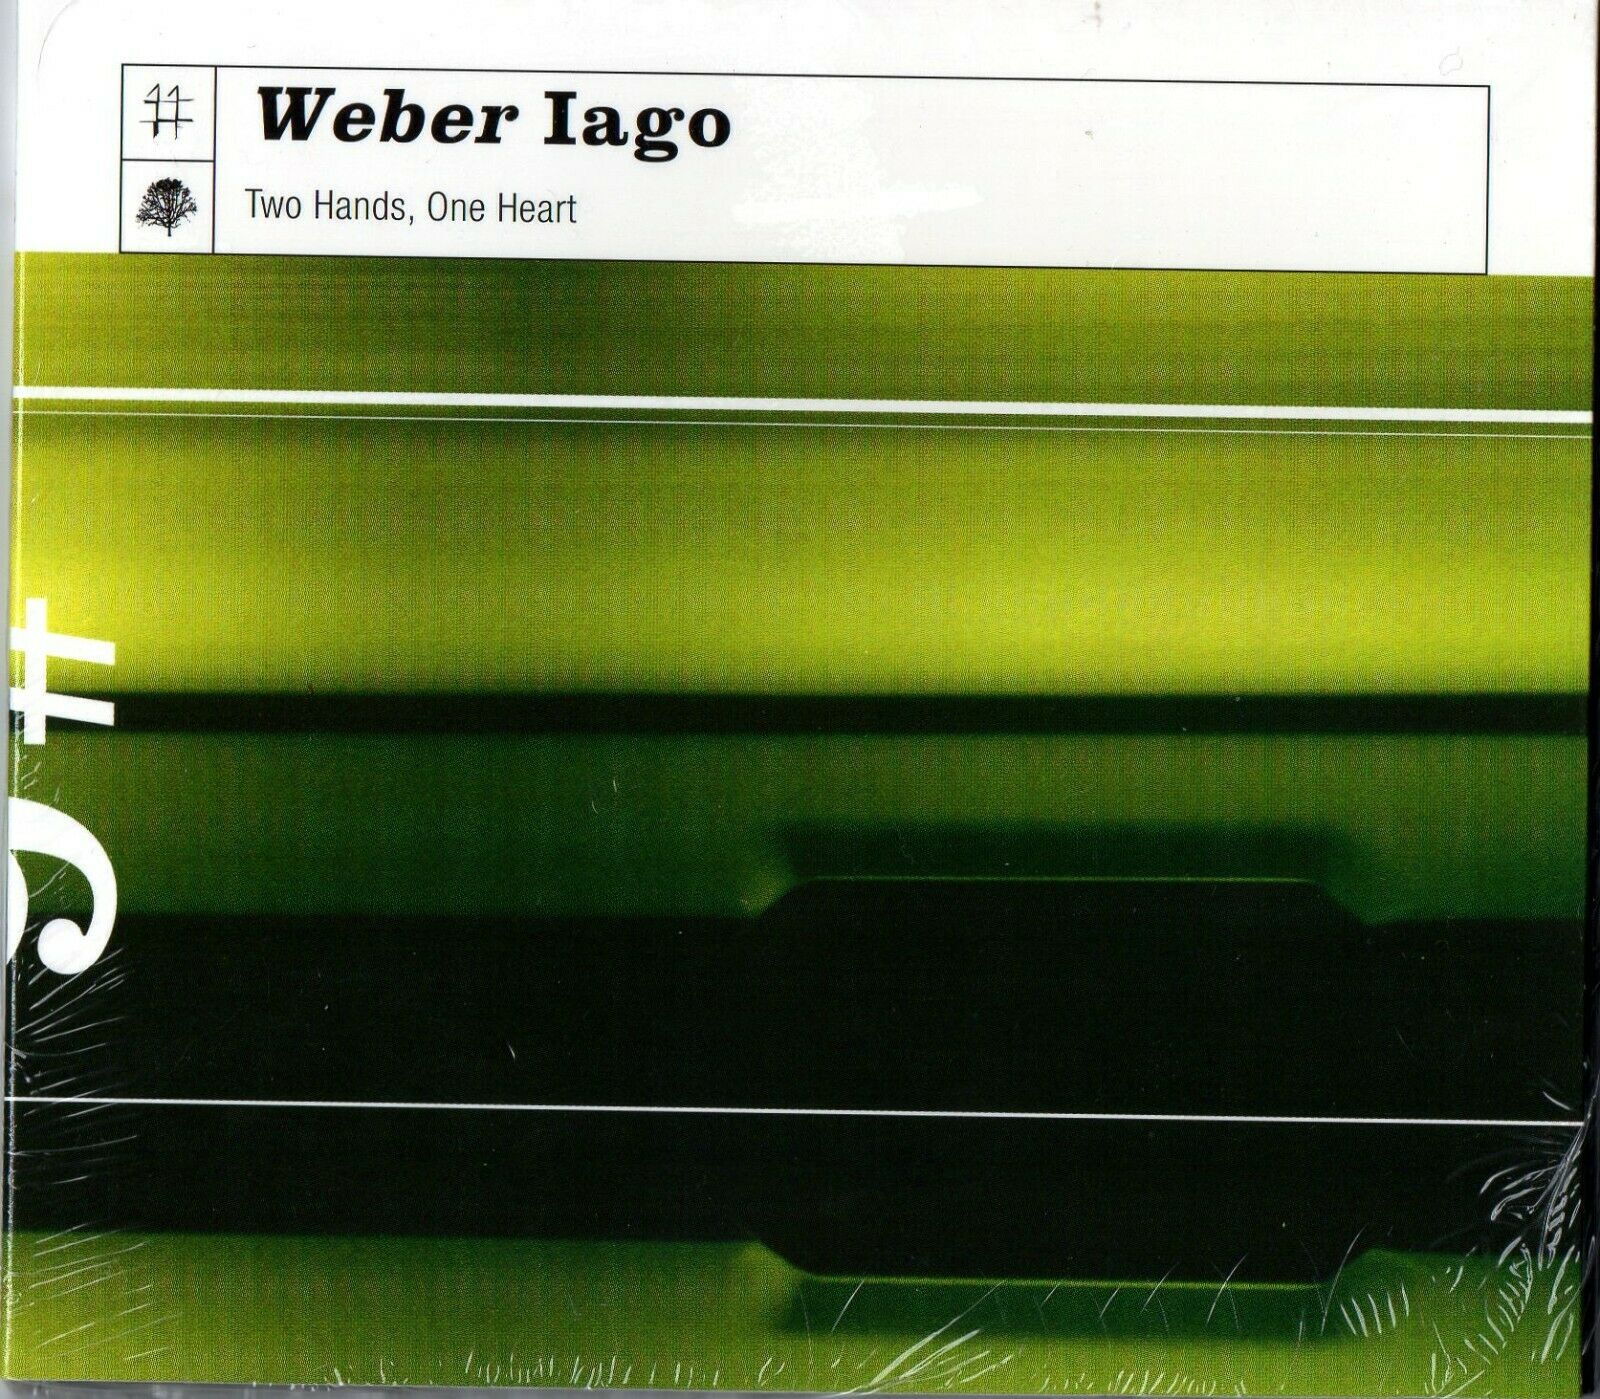 WEBER IAGO - Two Hands One Heart cover 